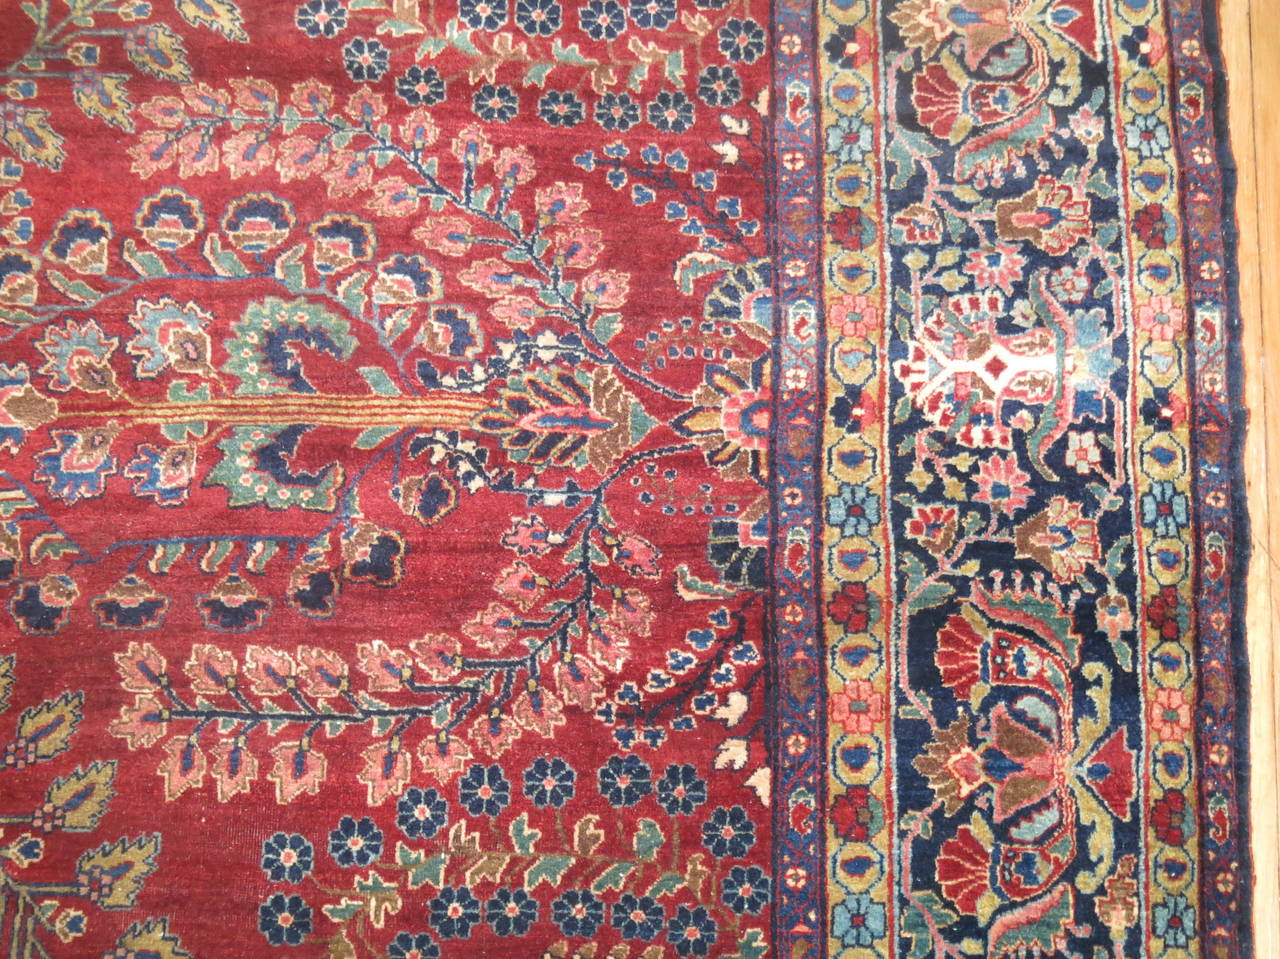 Early 20th century Persian Sarouk Fereghan rug in deep cranberry reds and blues.